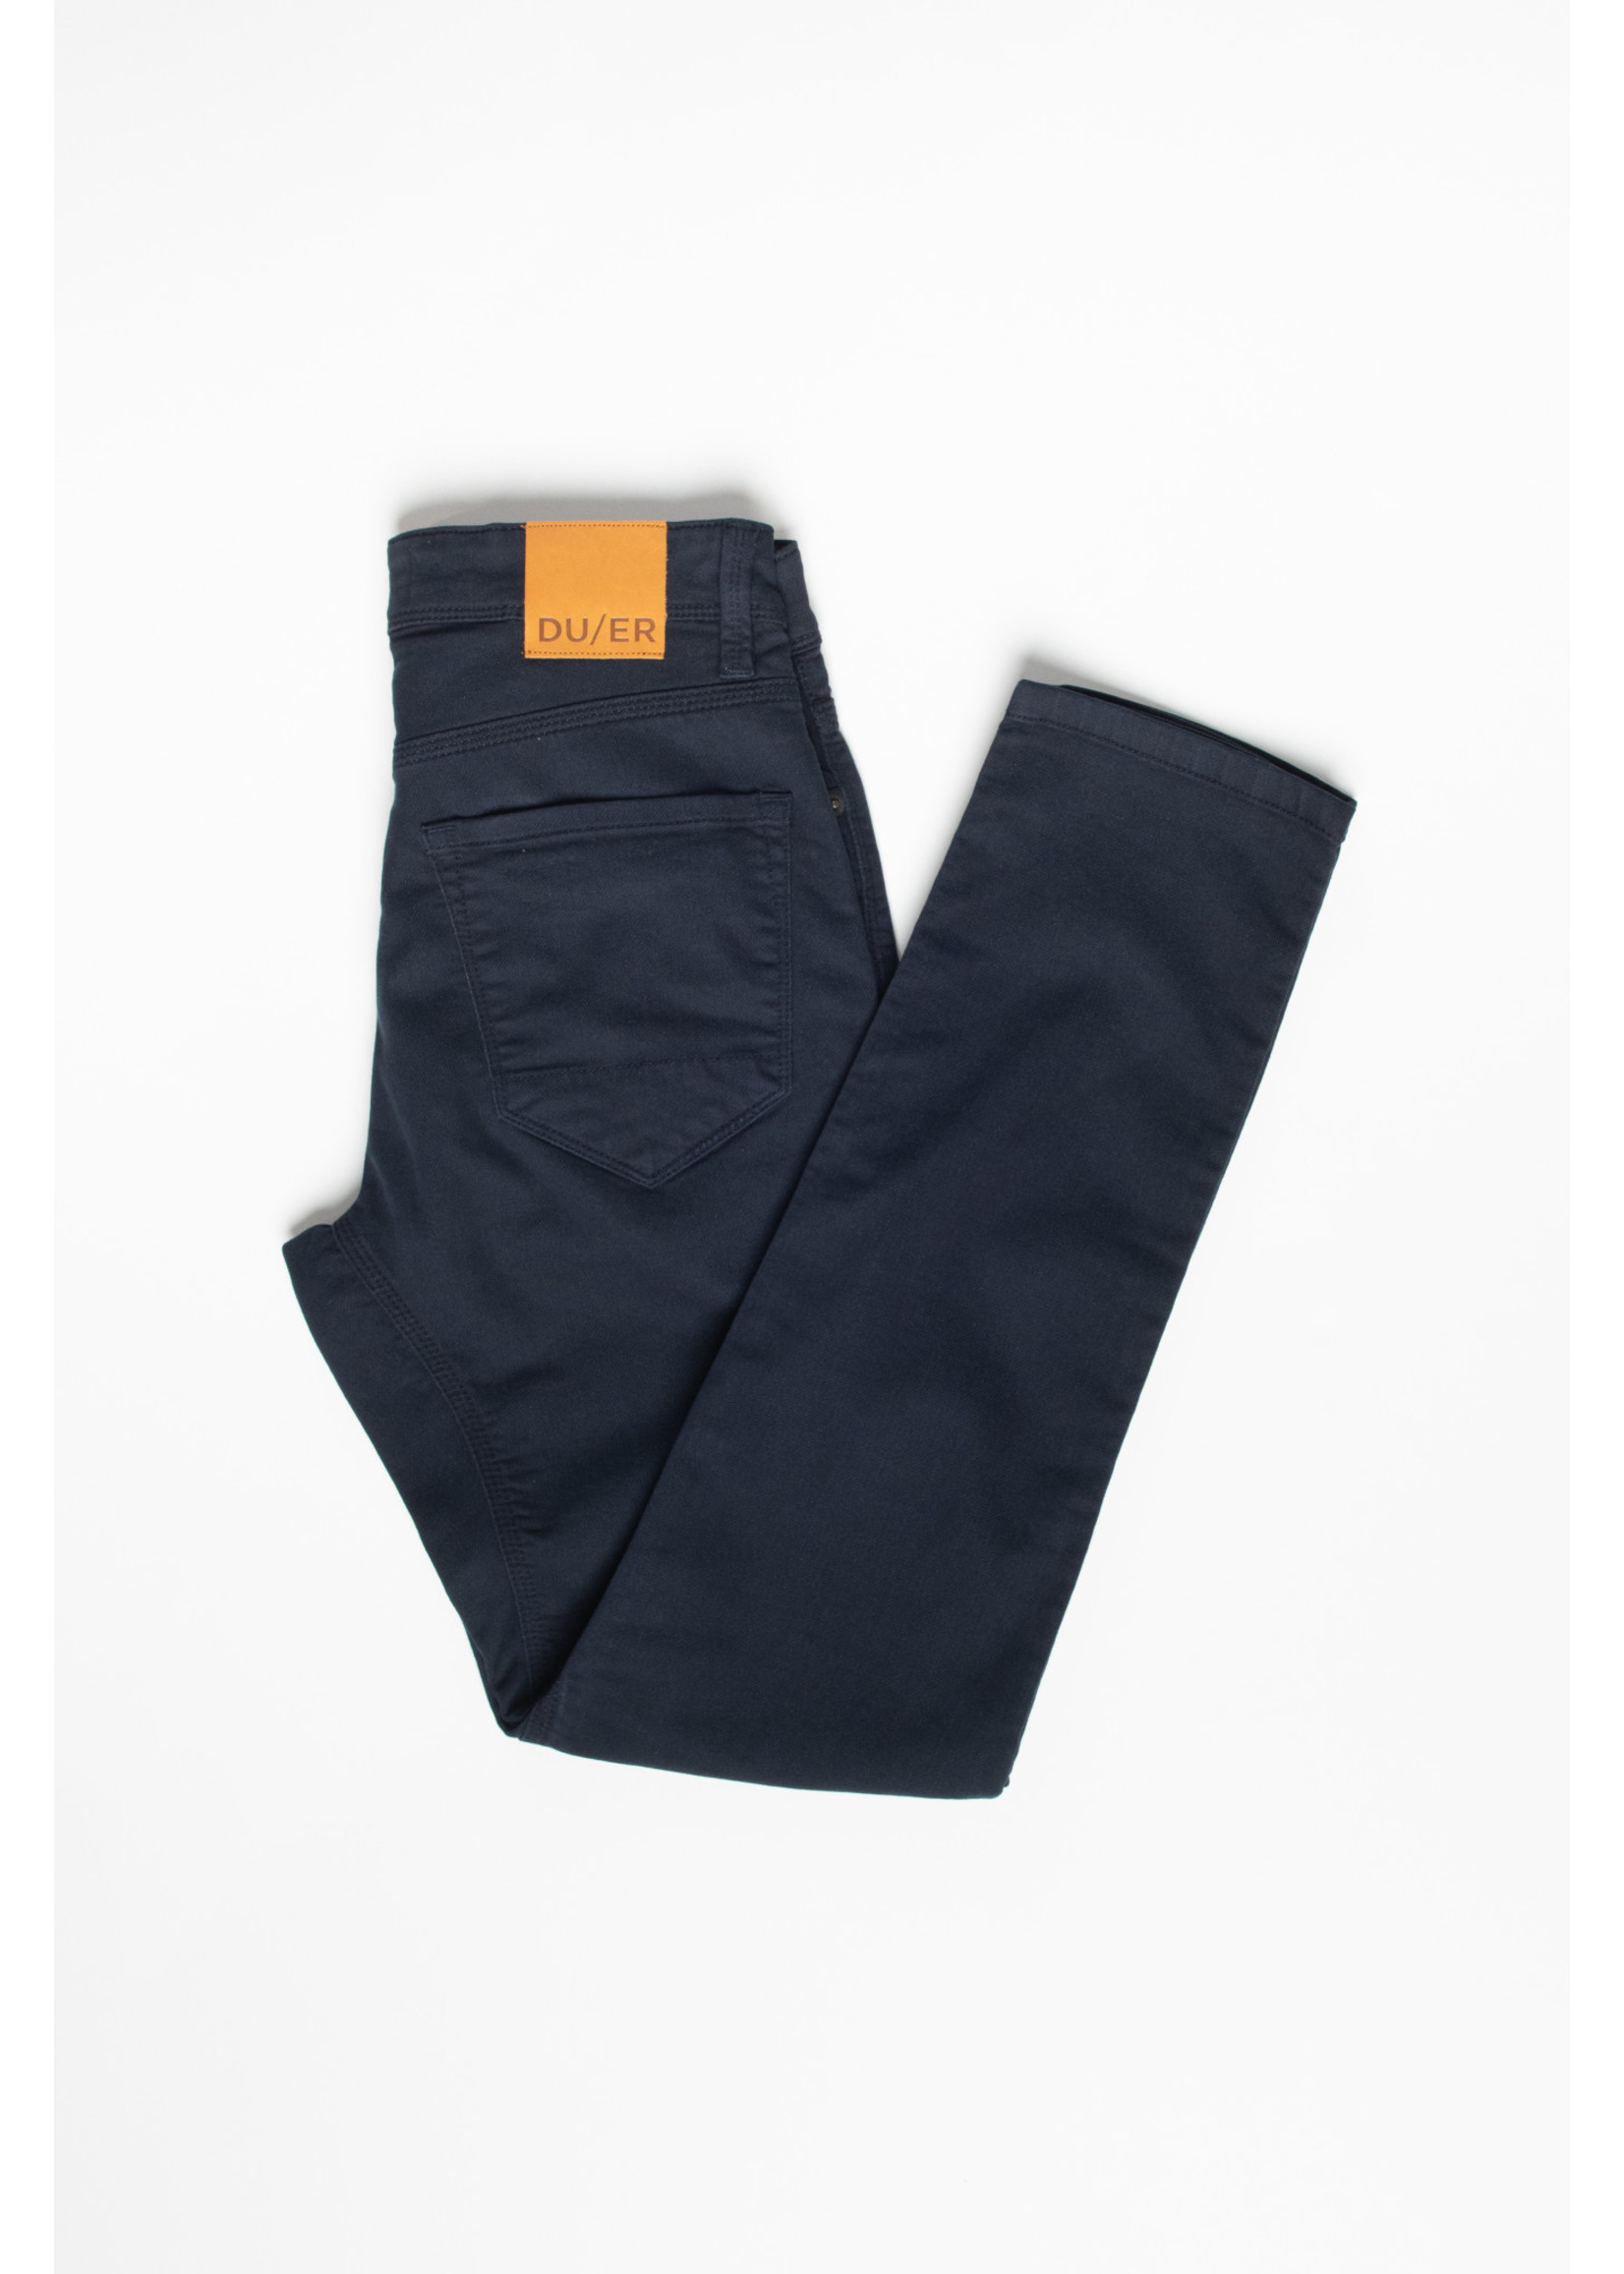 DUER NO SWEAT PANT RELAXED FIT